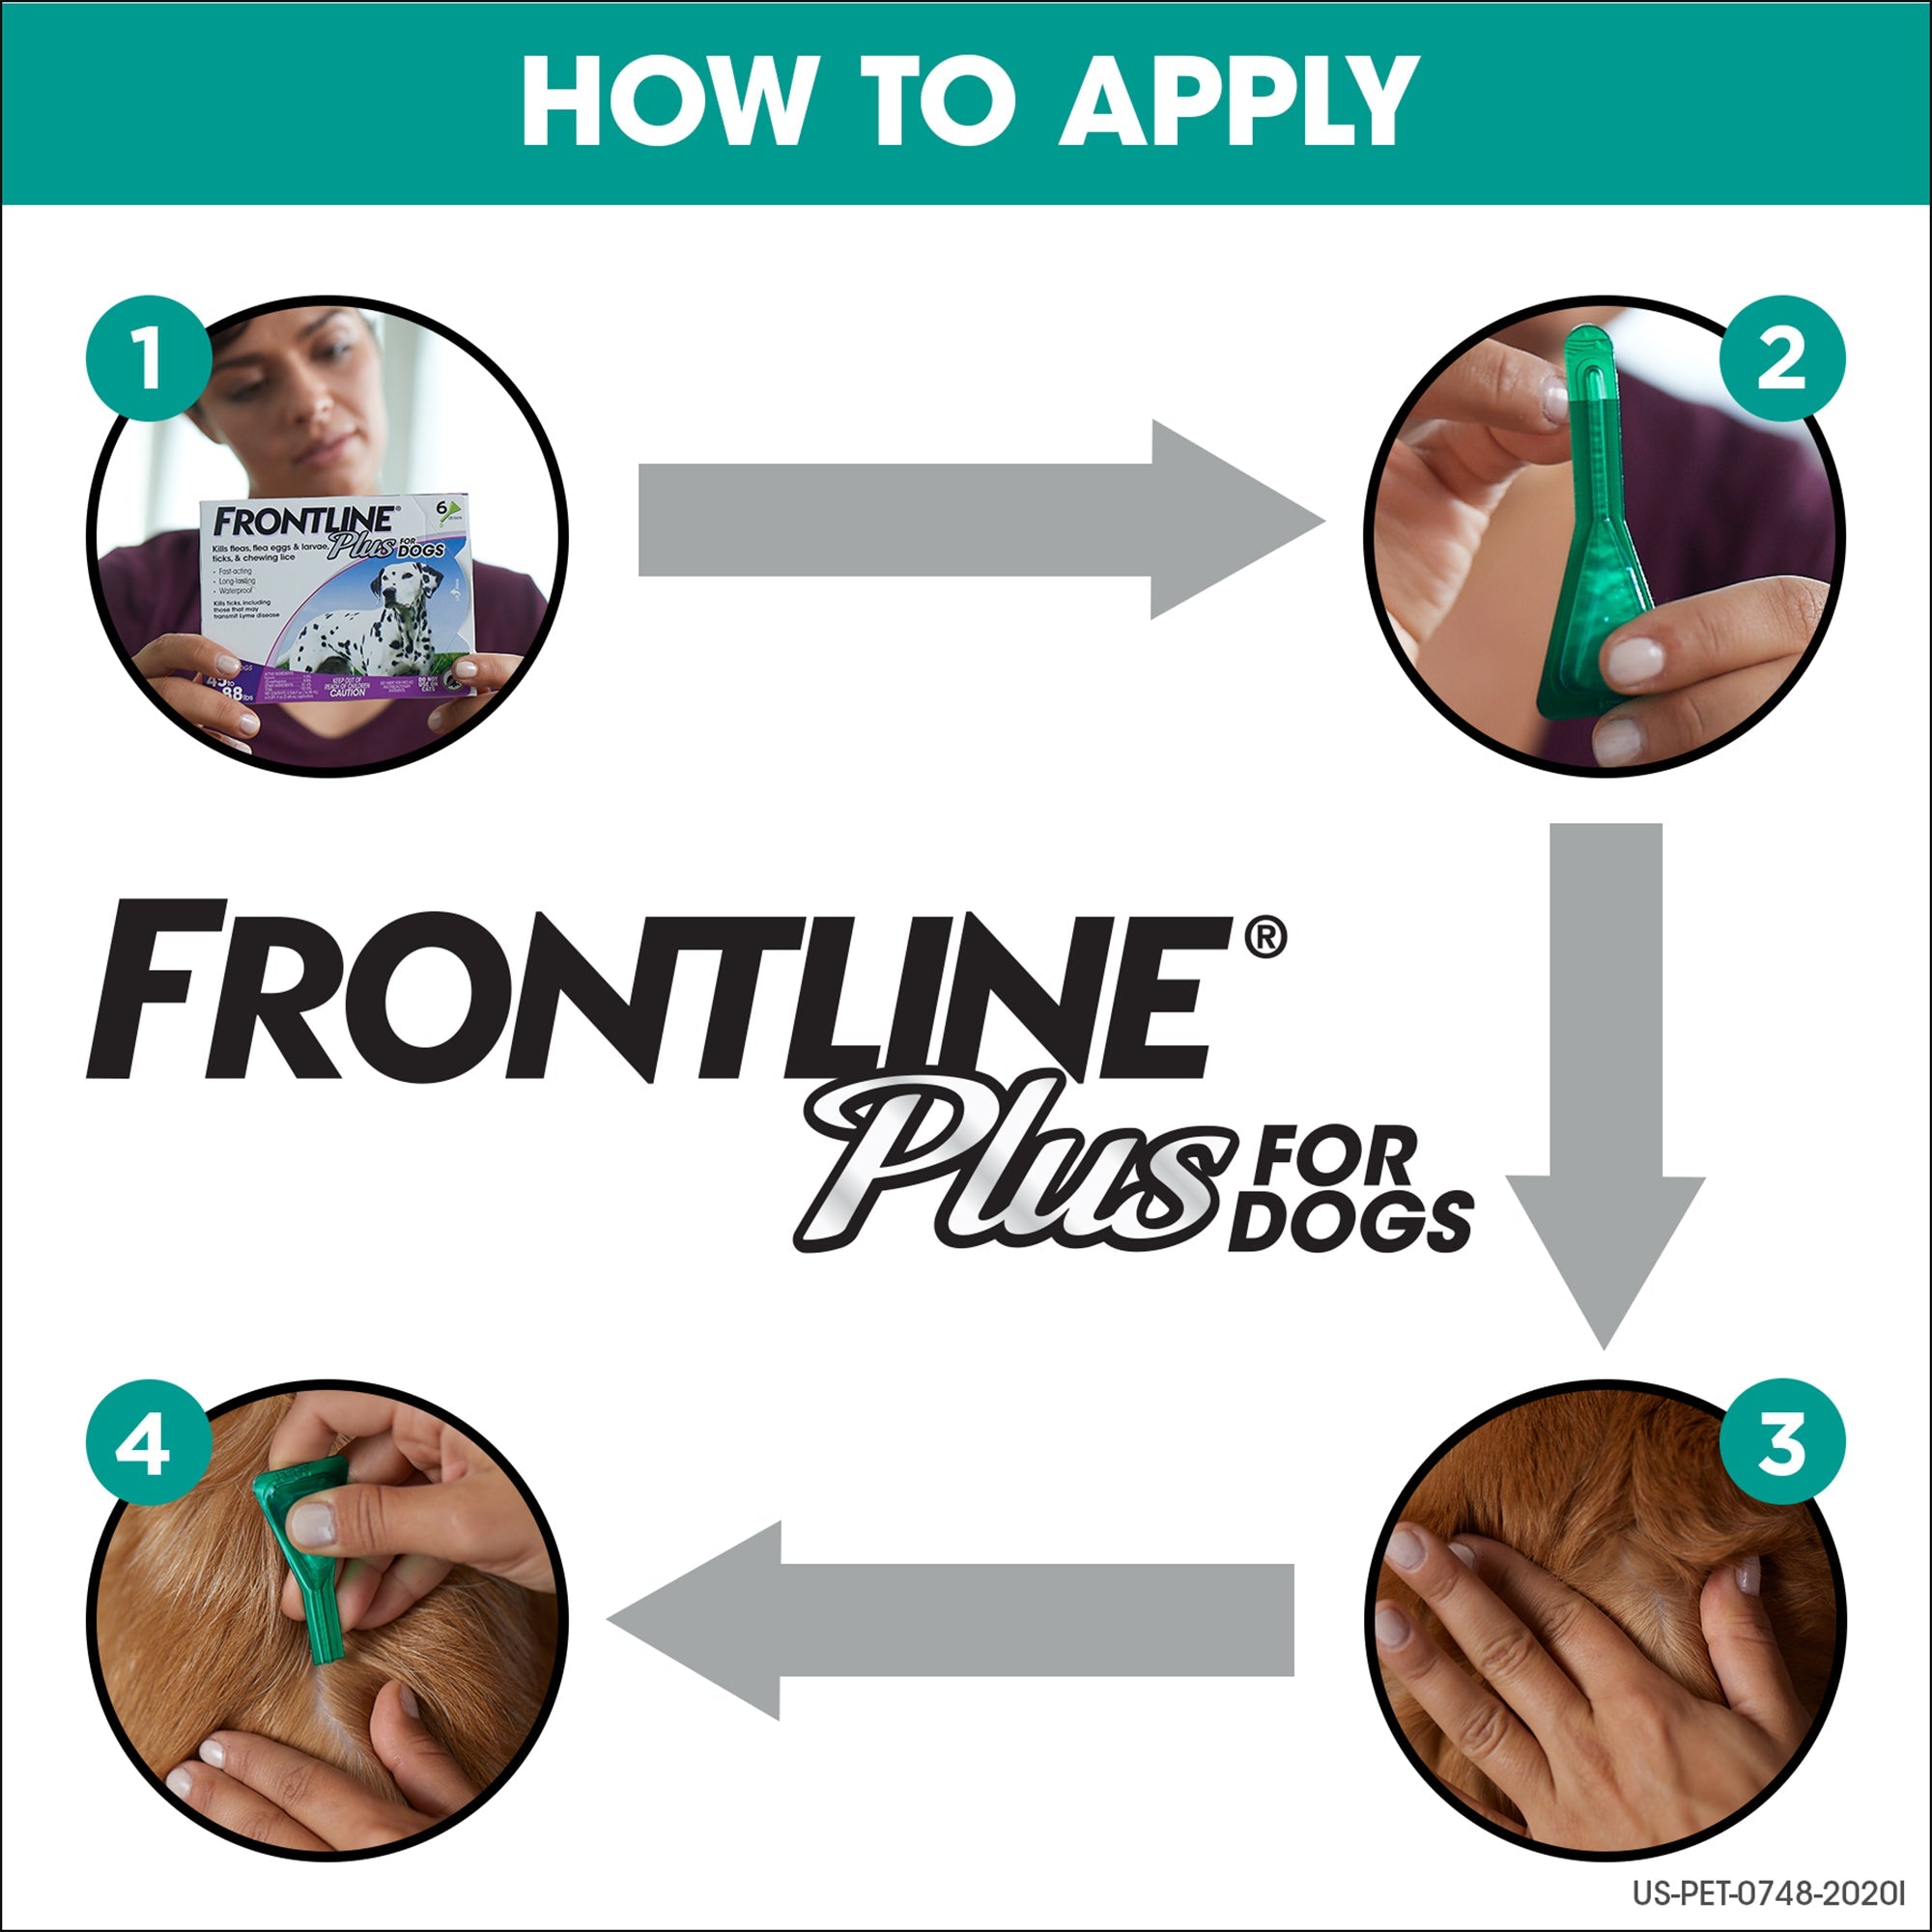 FRONTLINE Plus Flea and Tick Treatment for Small Dogs 5-22 Lbs, 3 Doses